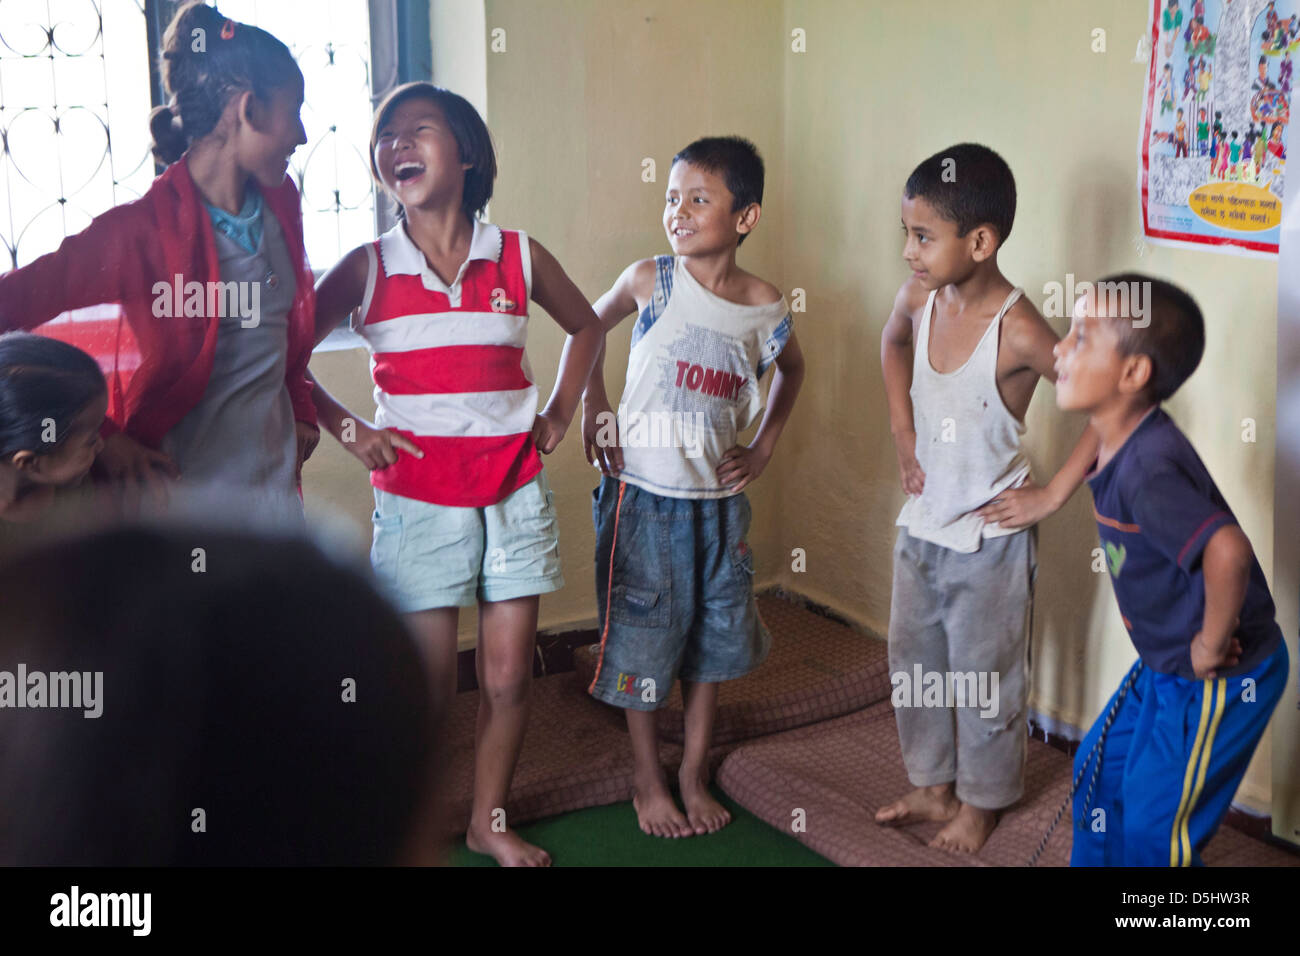 Play session with young street-children at Voice for Children rehabilitation center in Kathmandu, Nepal. Stock Photo